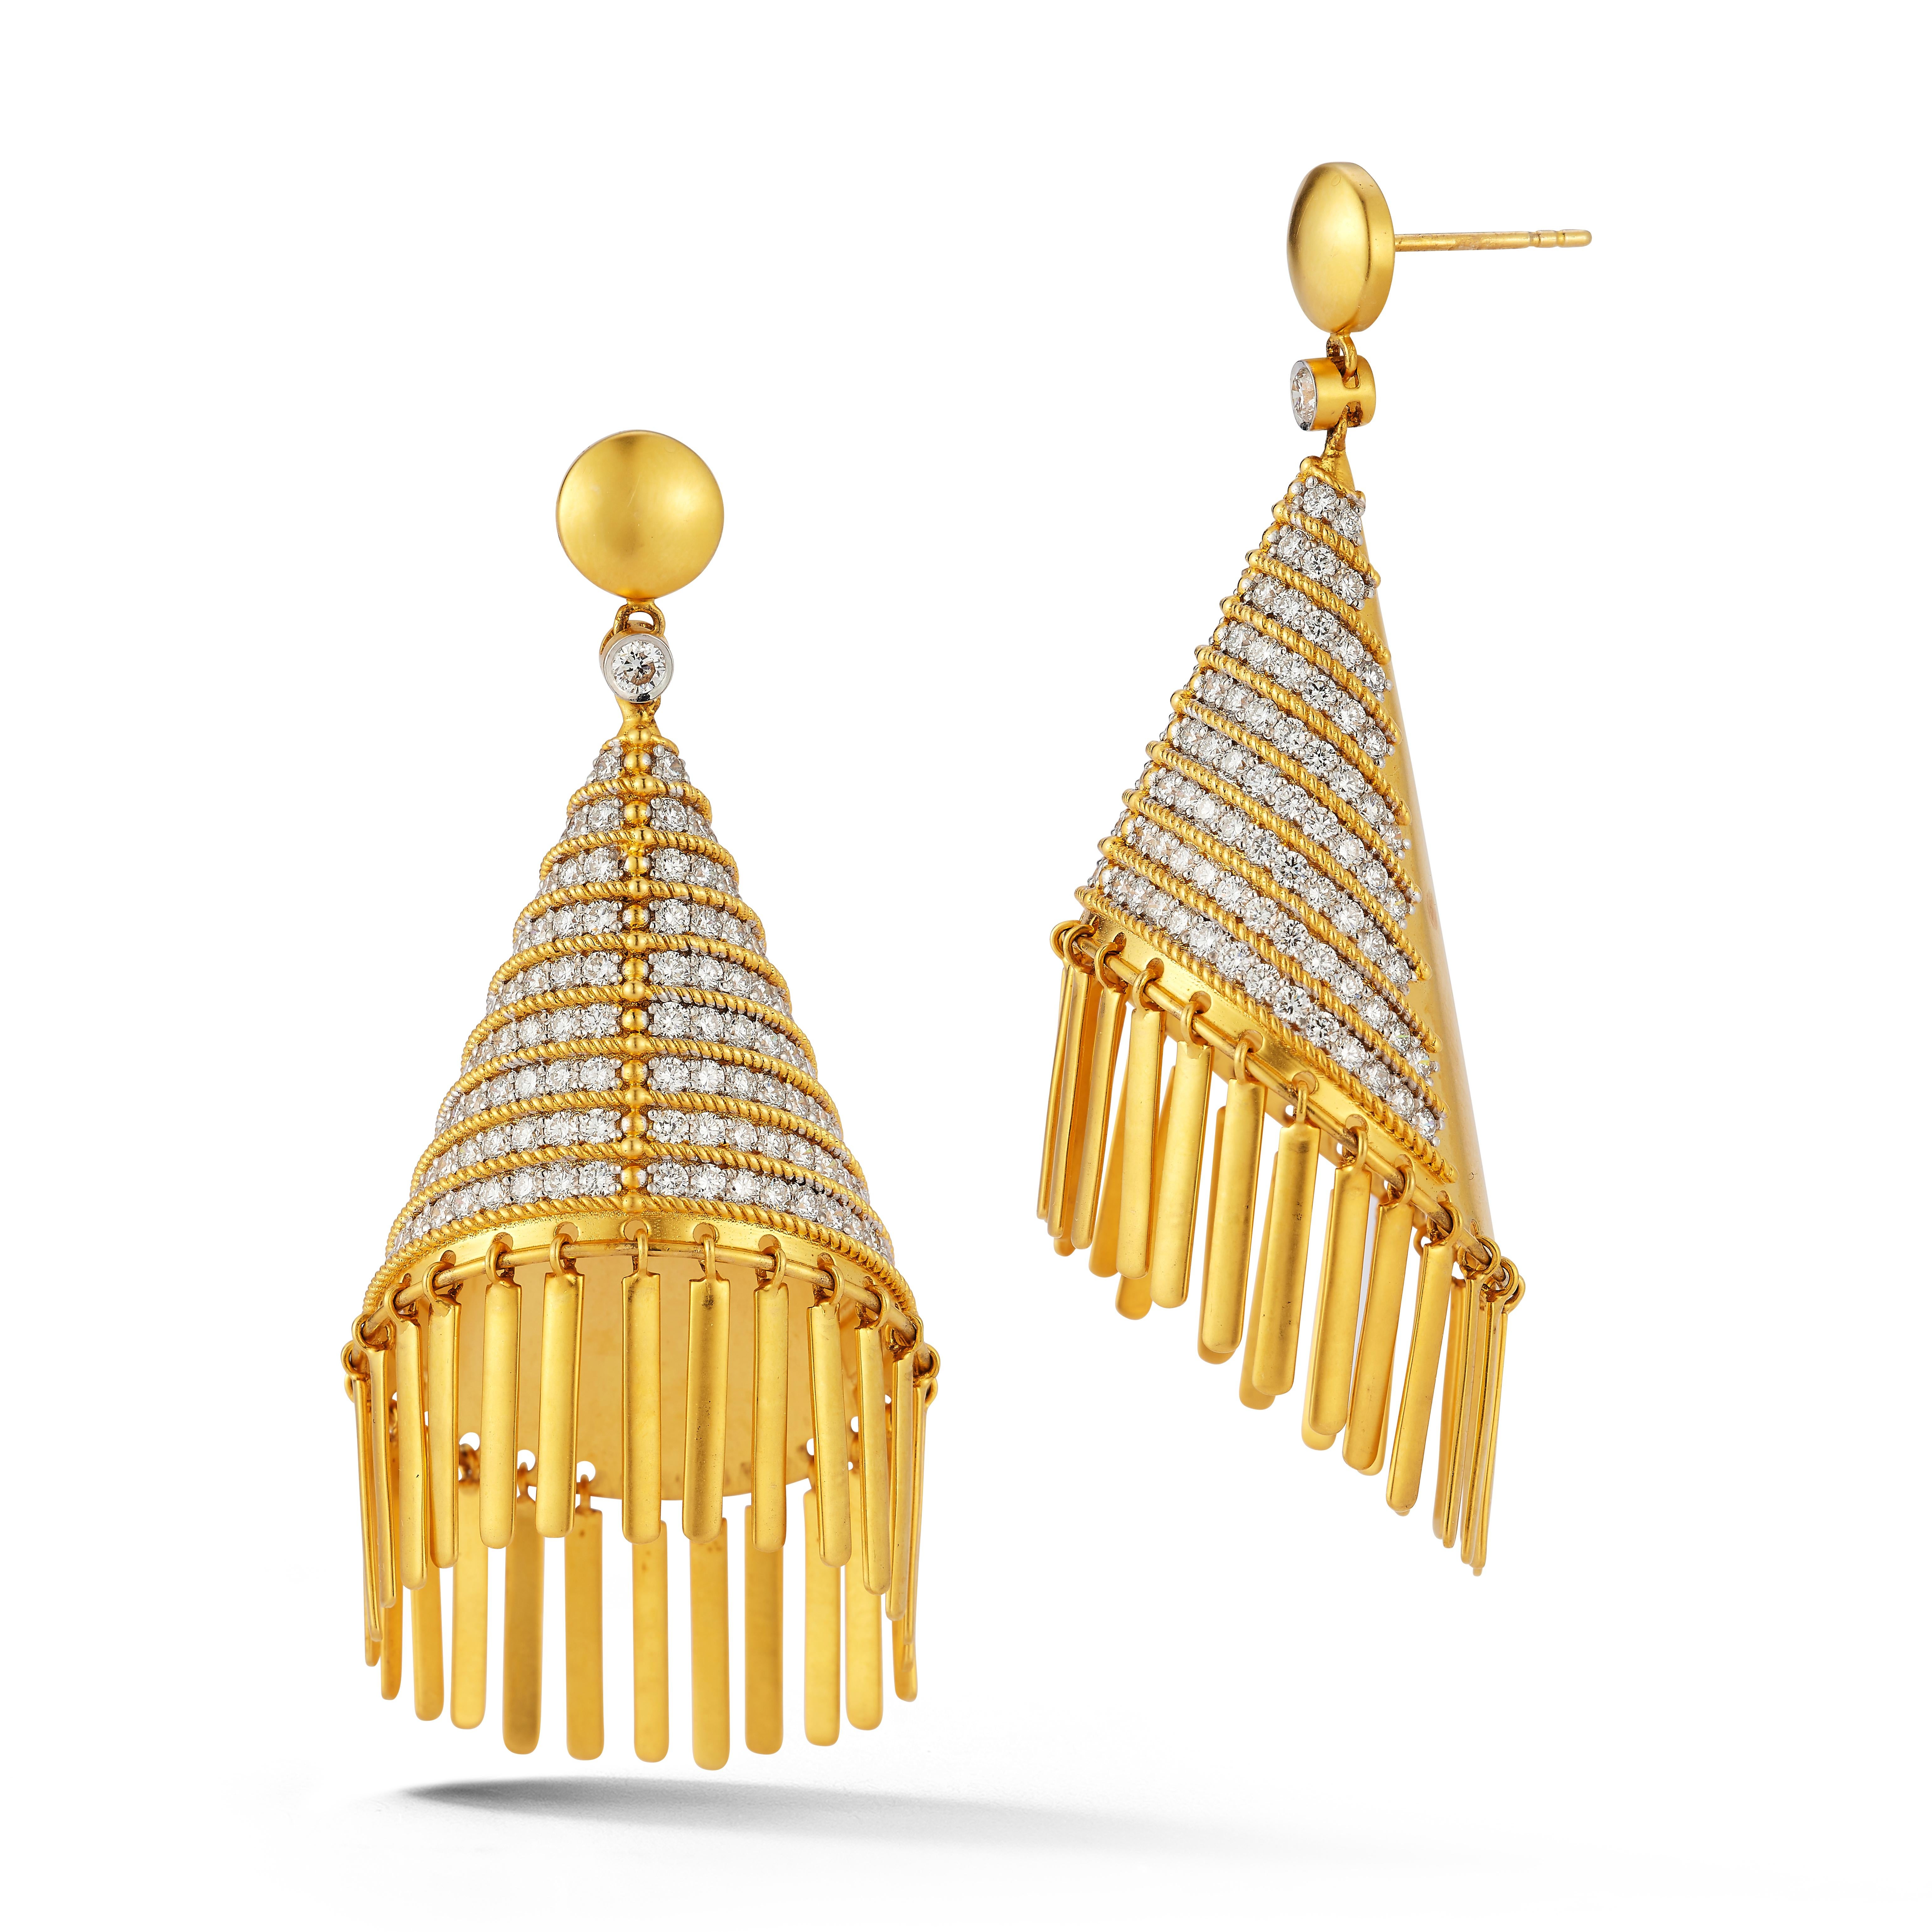 Chandelier Diamond Earrings

A pair of 18 karat gold cone shaped earrings set with 6.09 carats of round cut diamonds

Measurements: 2.75